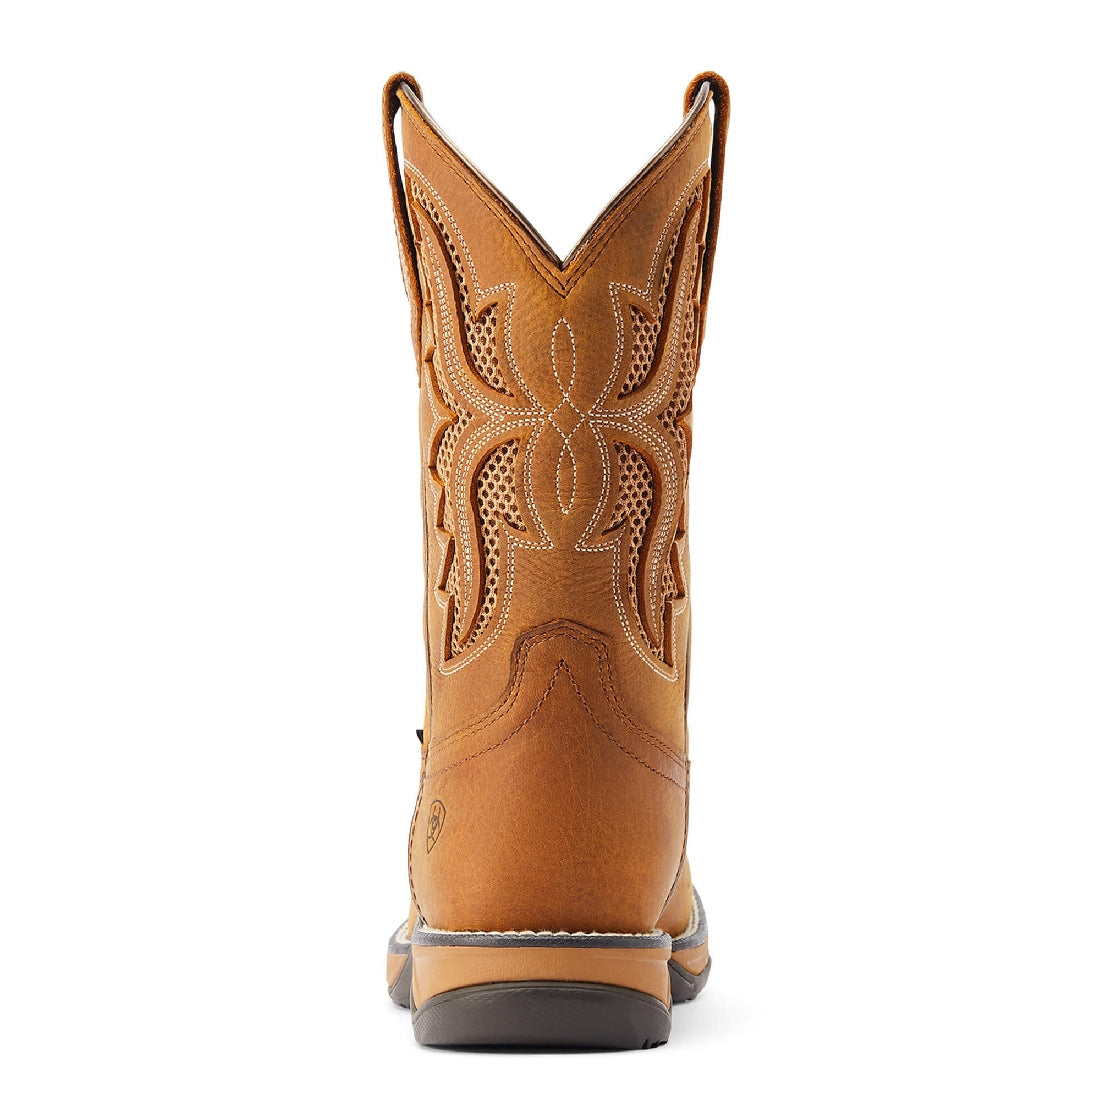 Western Boots Ariat Anthem Venttek H20 Toasted Wheat Ladies-Ascot Saddlery-The Equestrian